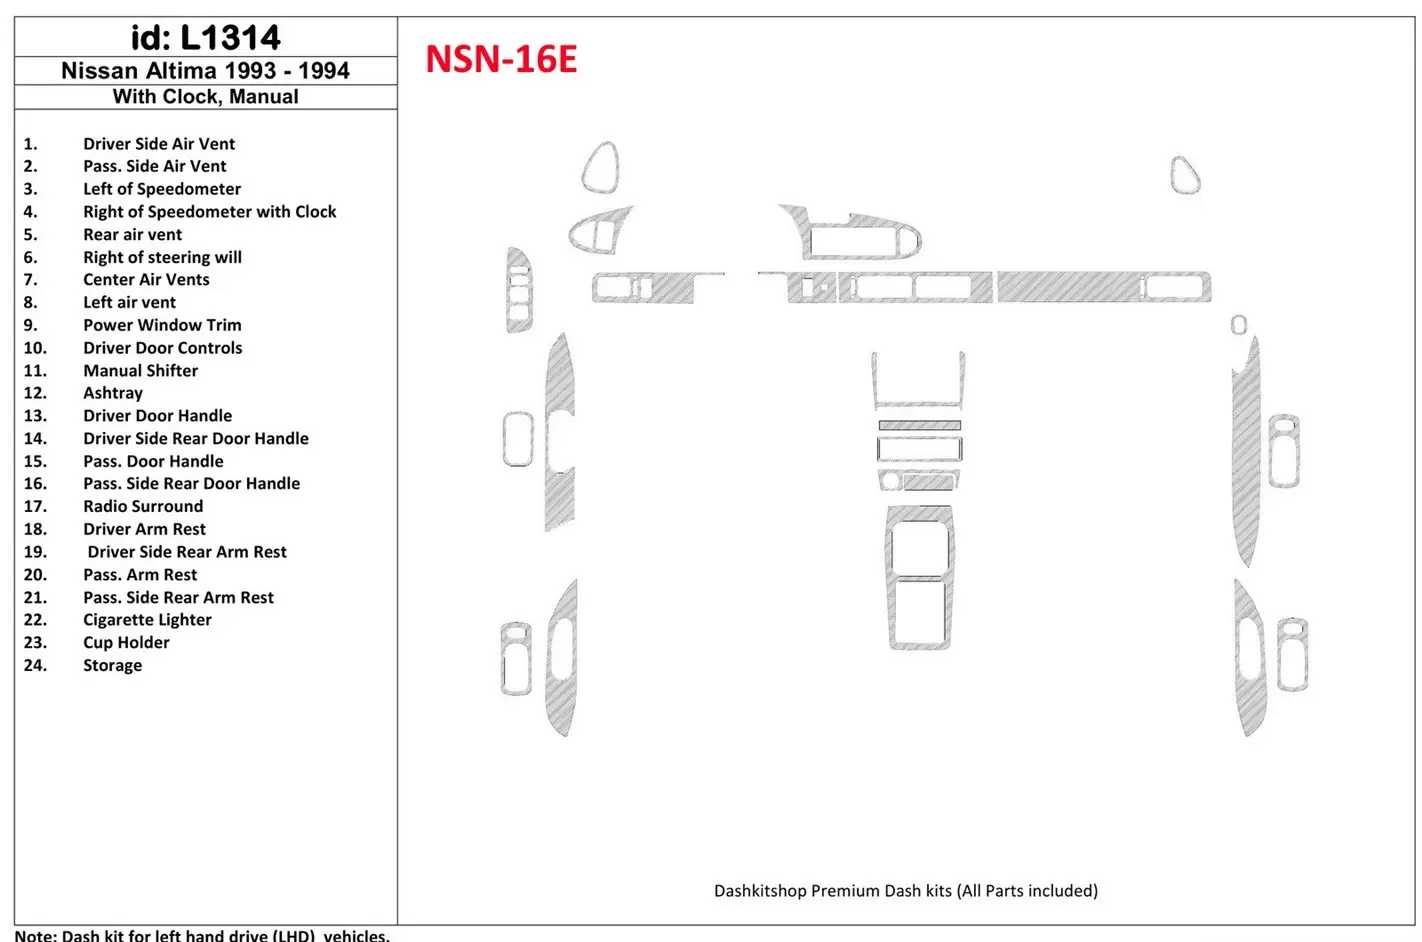 Nissan Altima 1993-1993 Automatic Gearbox, With watches, Without OEM, 23 Parts set Interior BD Dash Trim Kit